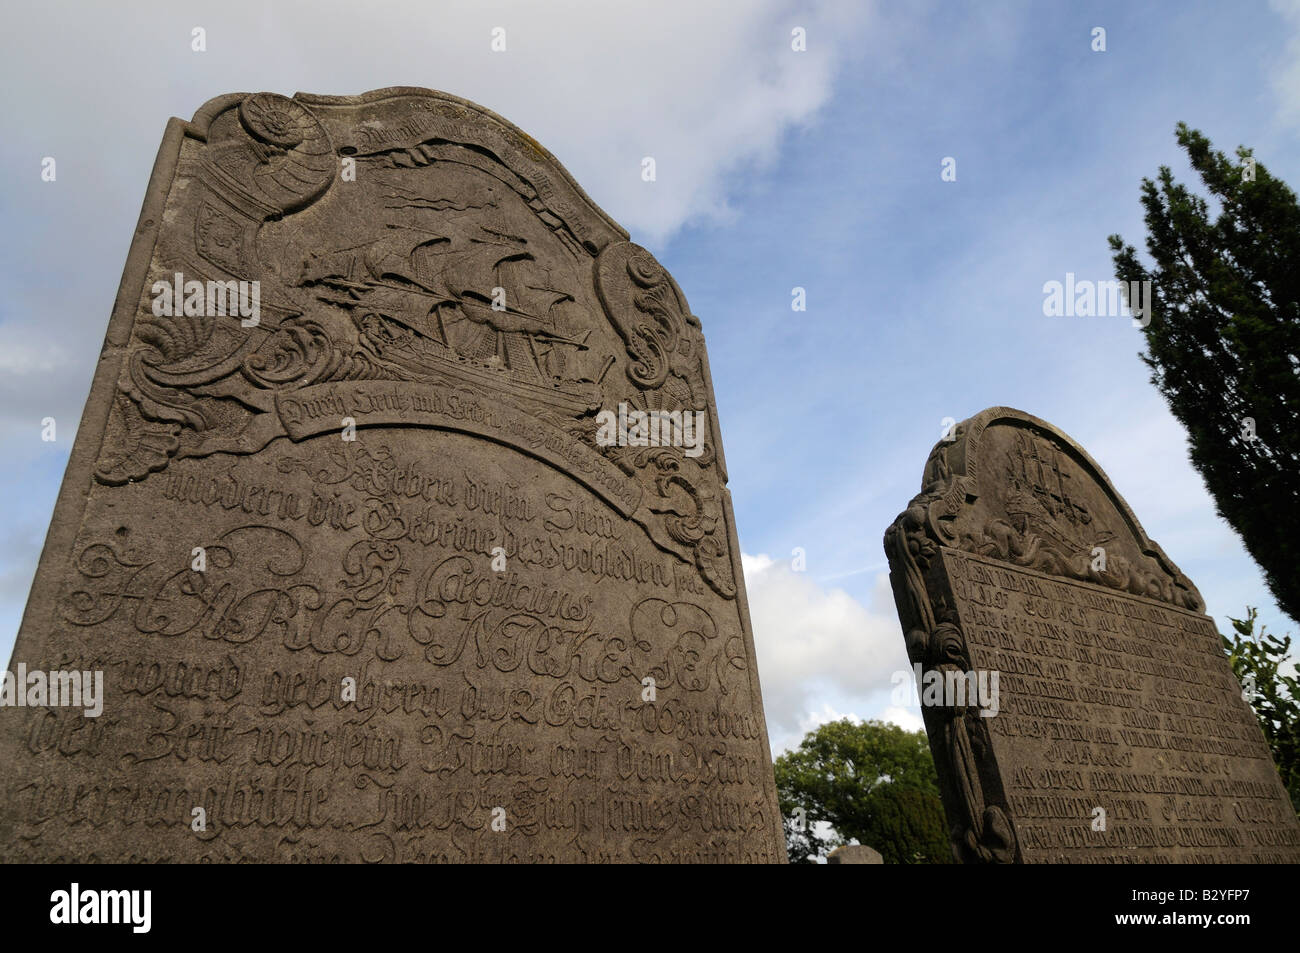 Headstones of rich captains in cemetery on German island North Sea island of Amrum Stock Photo